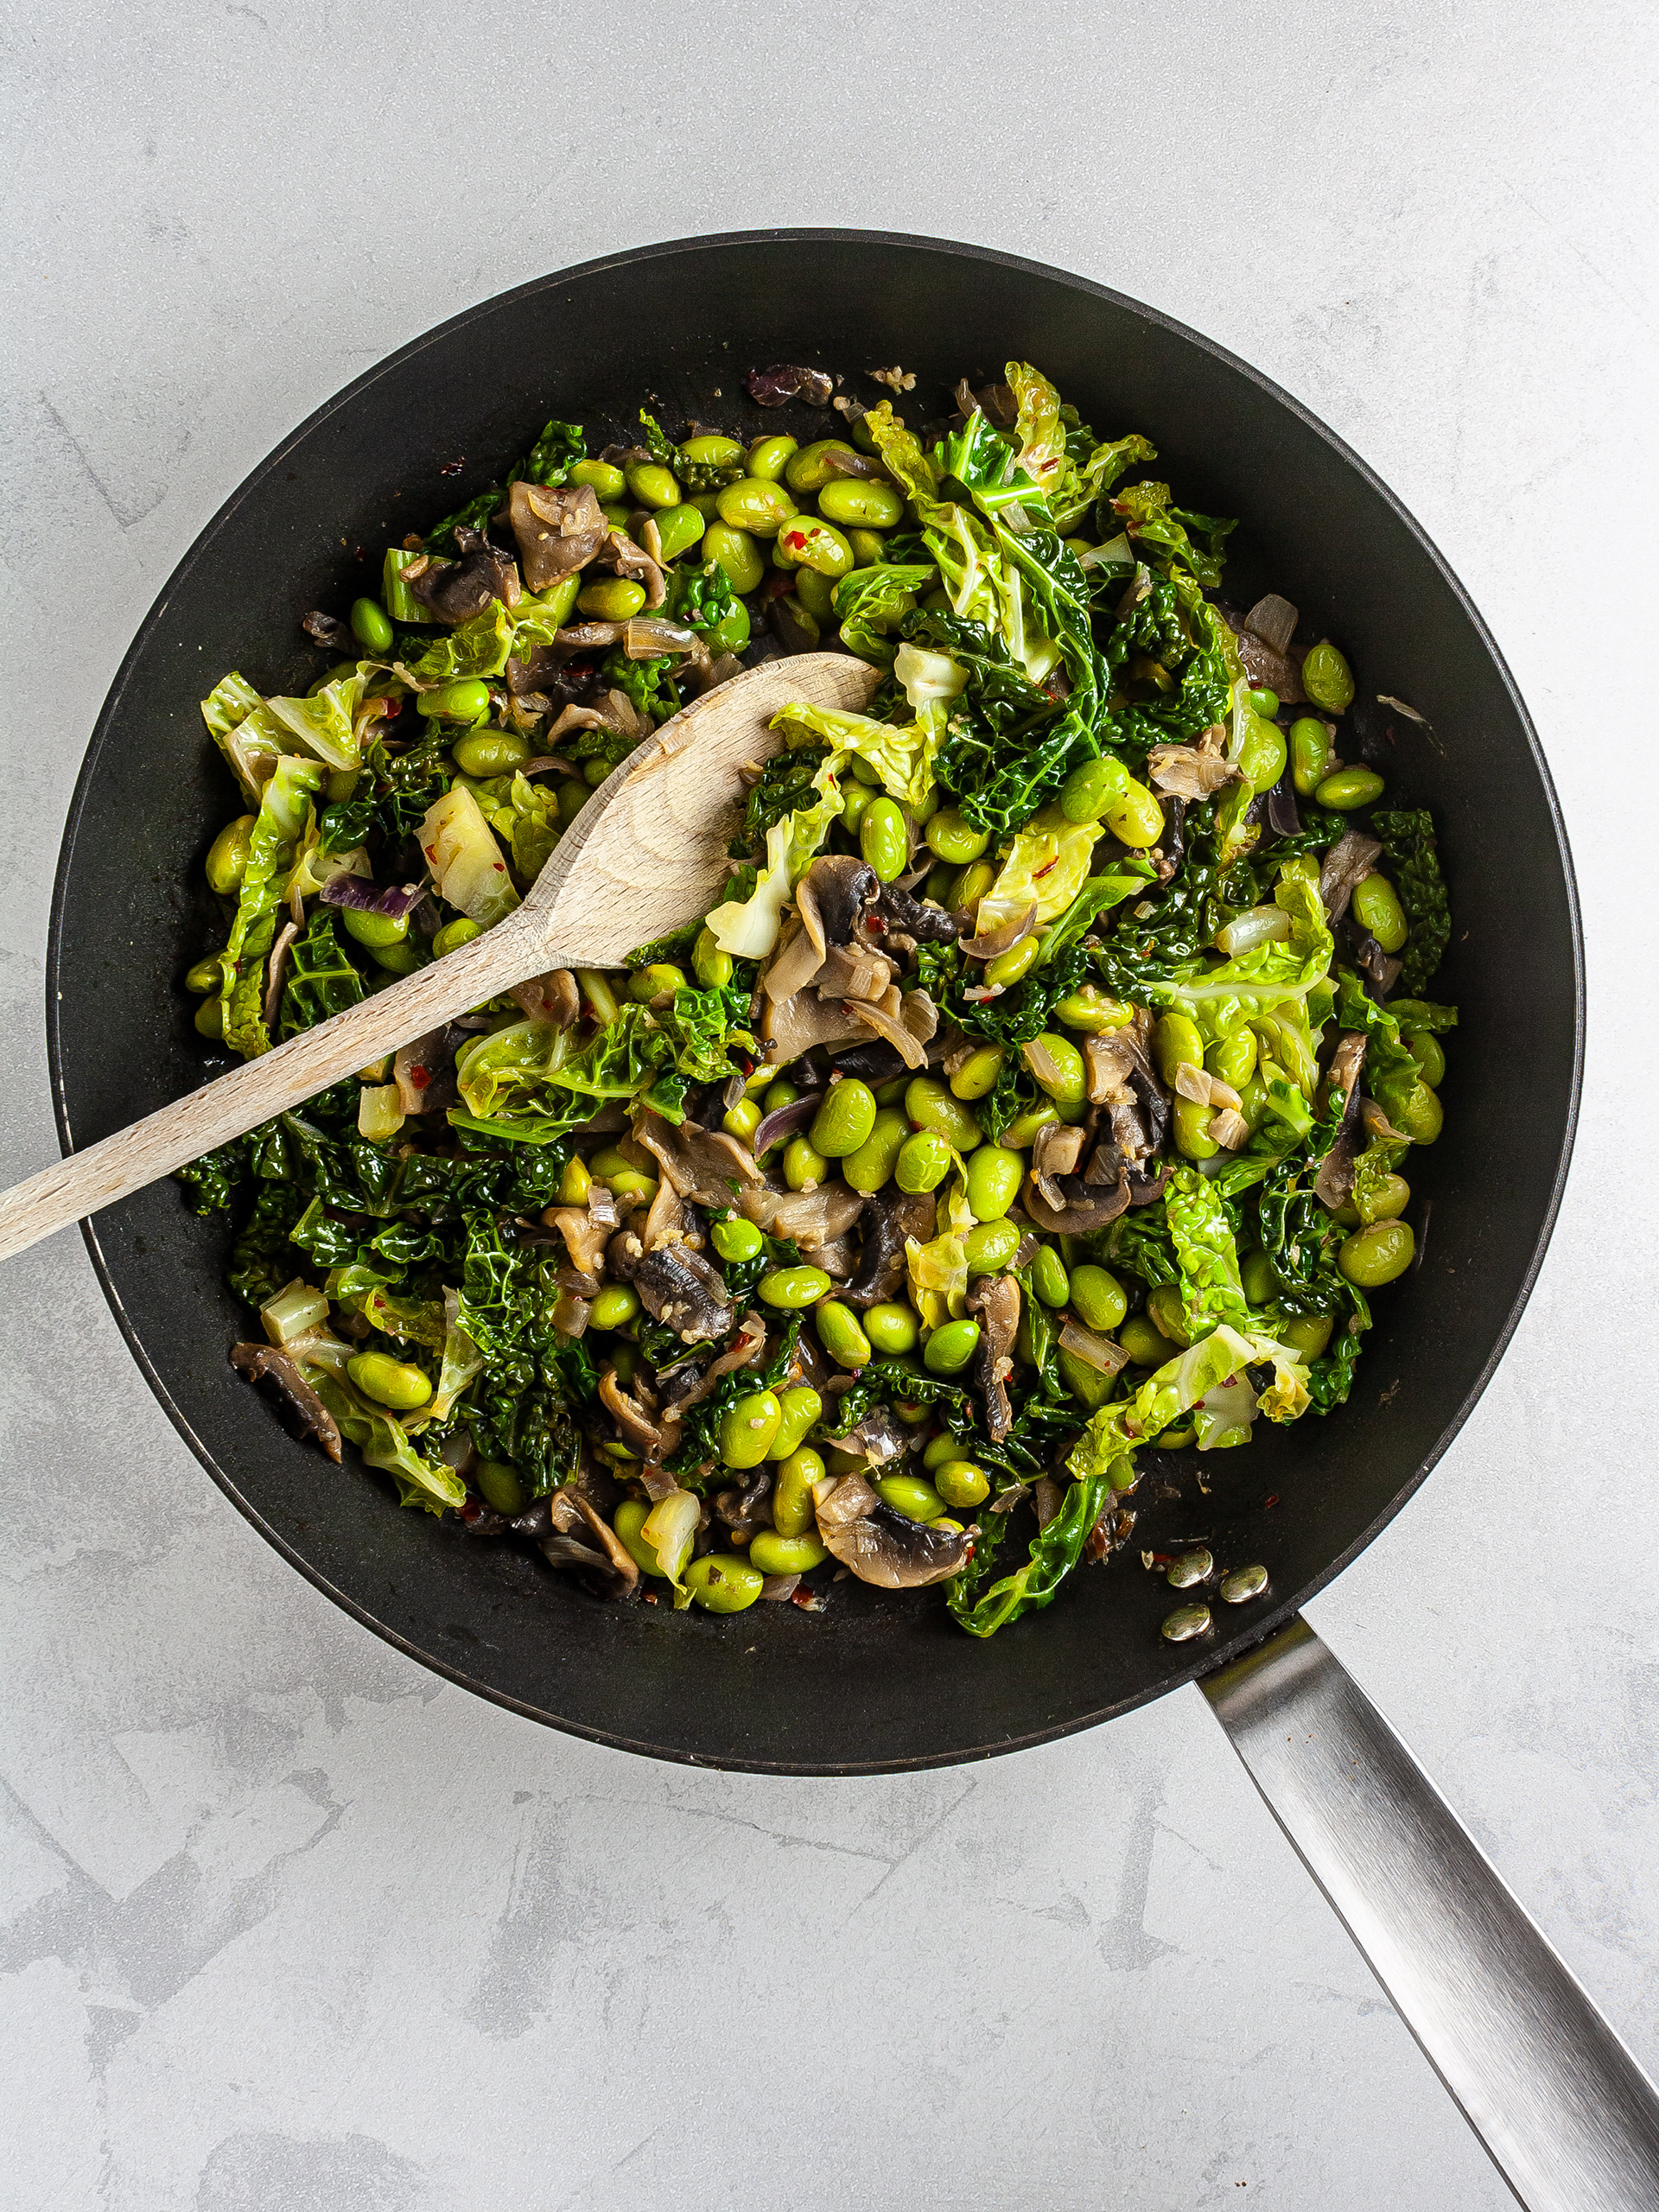 Cooked cabbage, mushroom, and edamame in a skillet